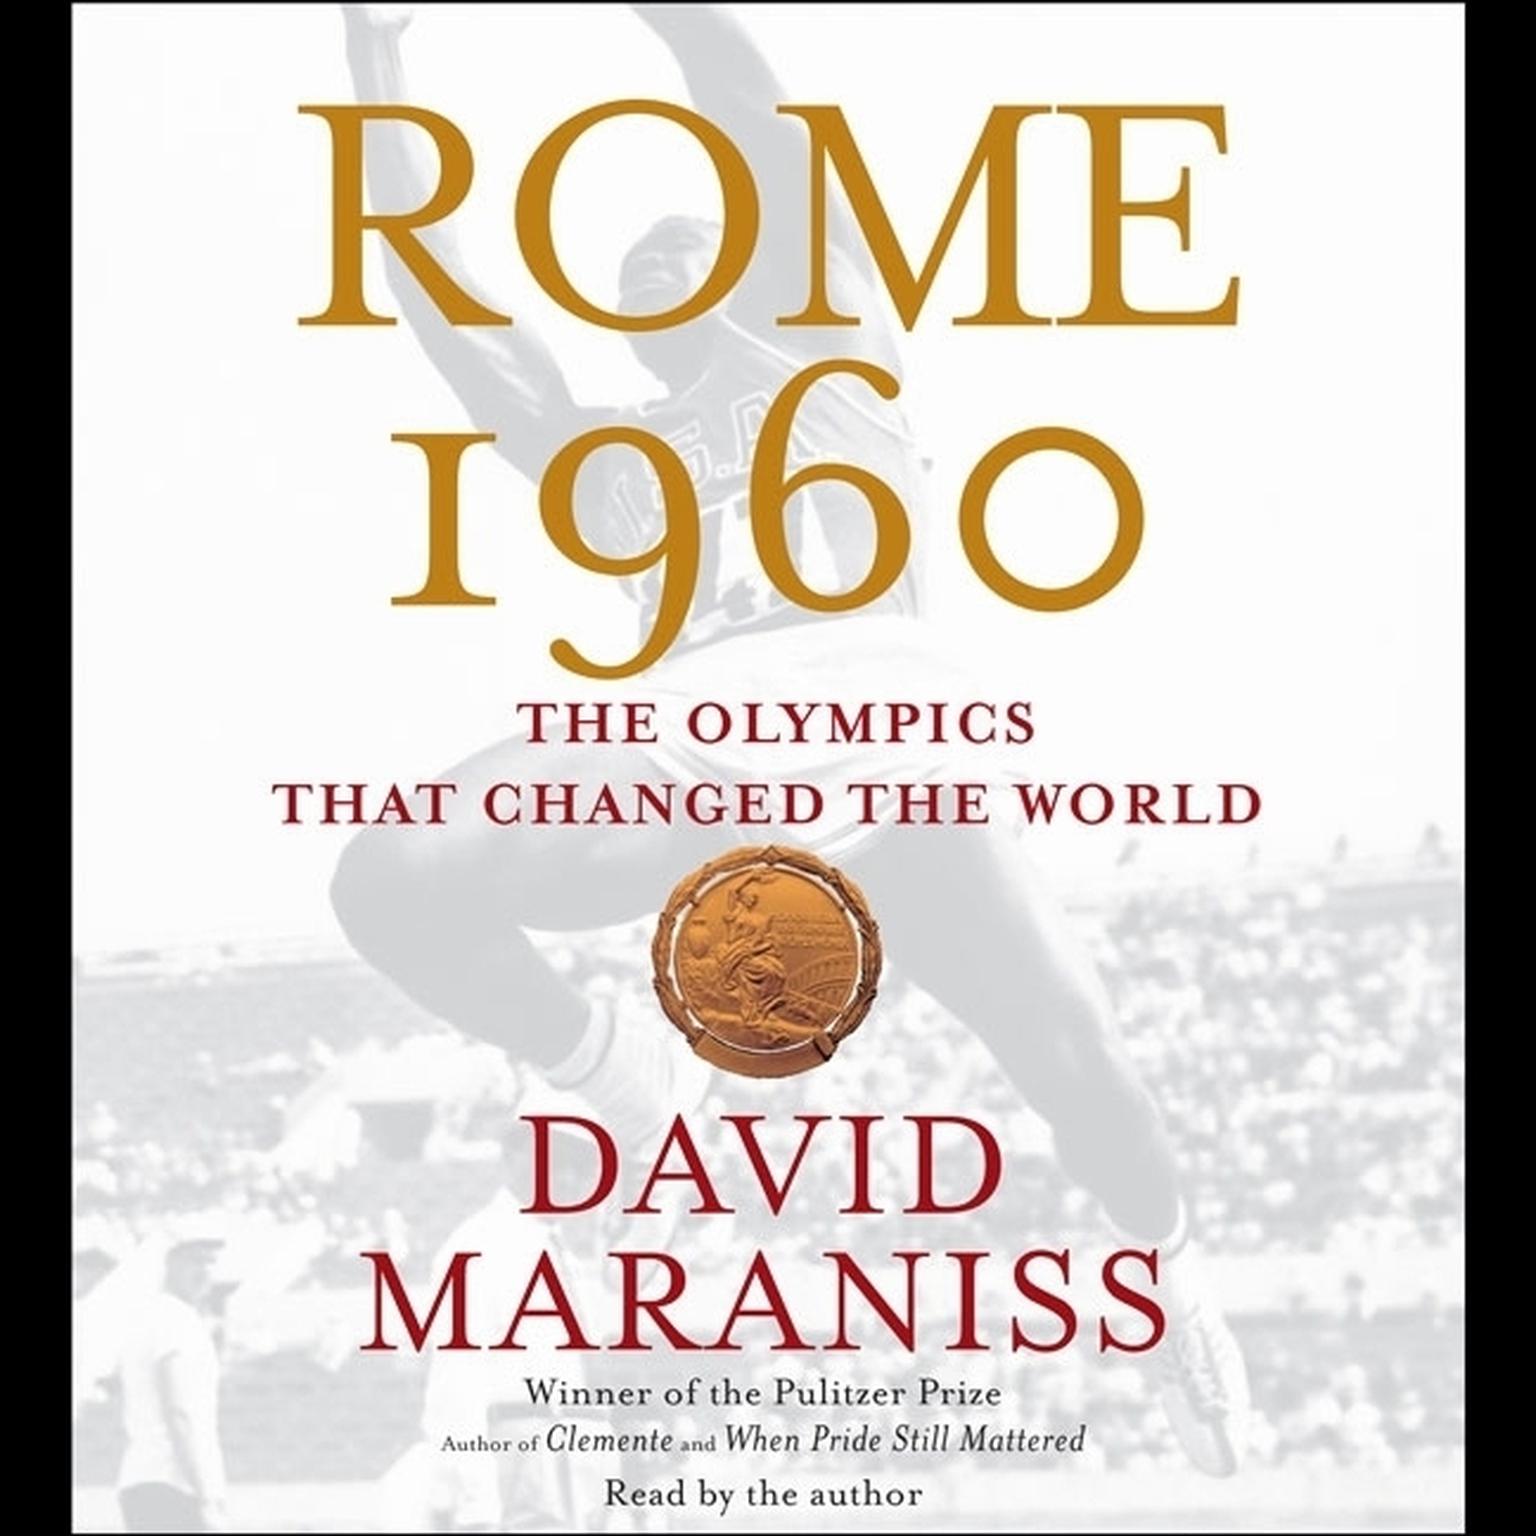 Rome 1960 (Abridged): The Olympics that Changed the World Audiobook, by David Maraniss